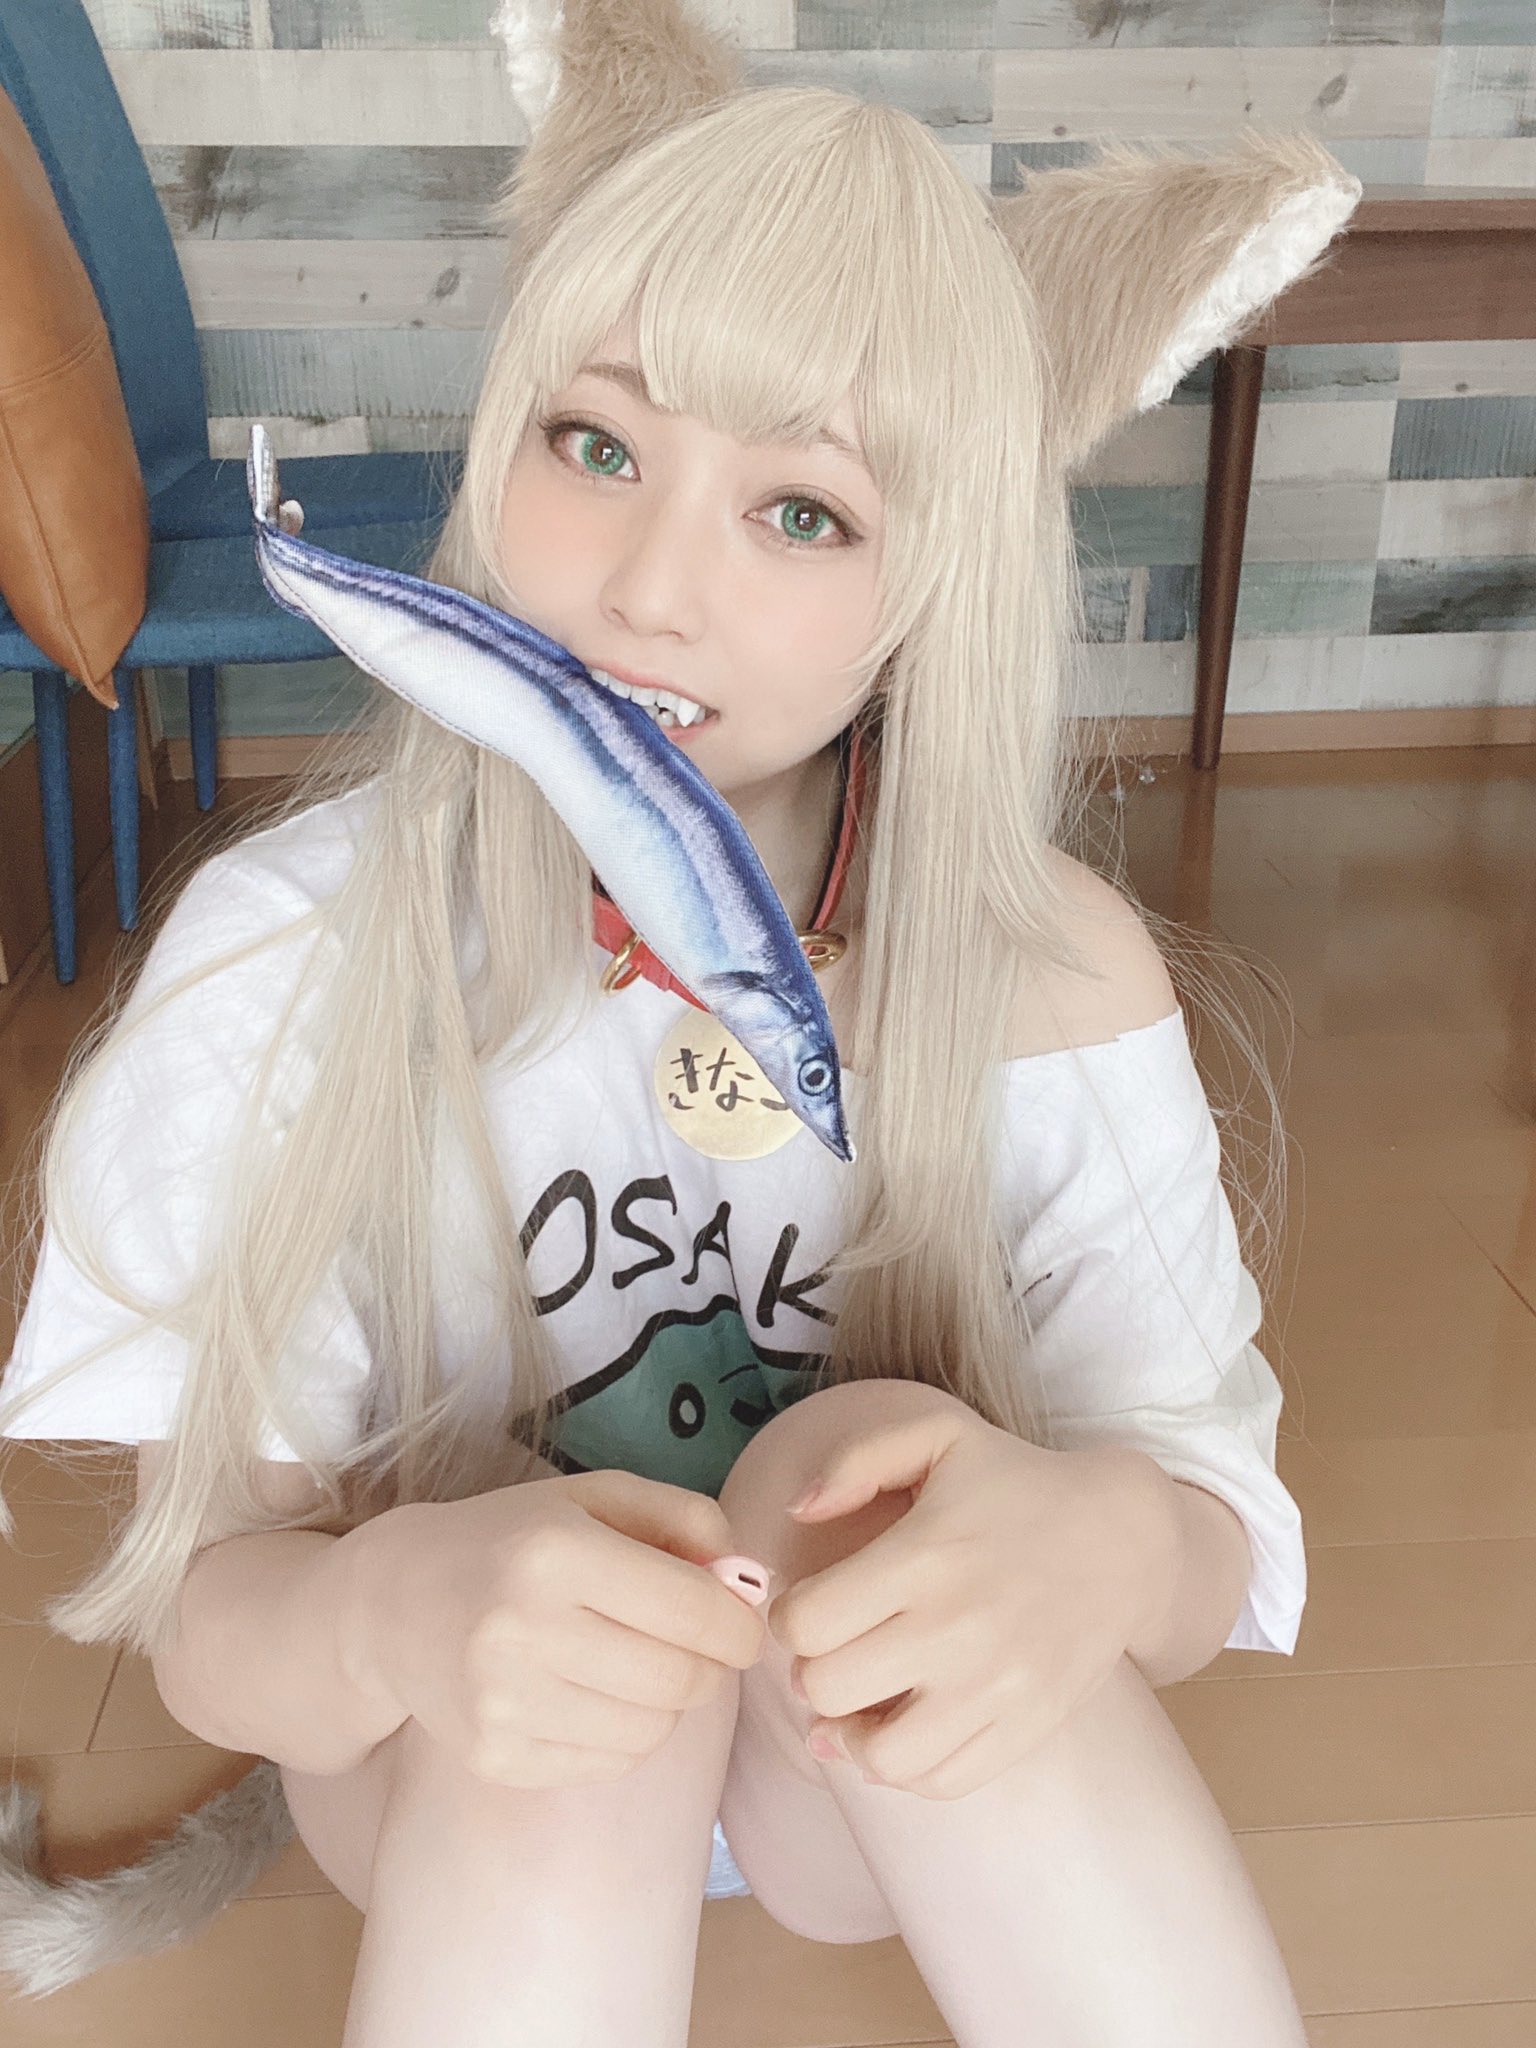 Hara S Catgirl Kinako Comes To Life In This Cosplay By Hoshino Mami